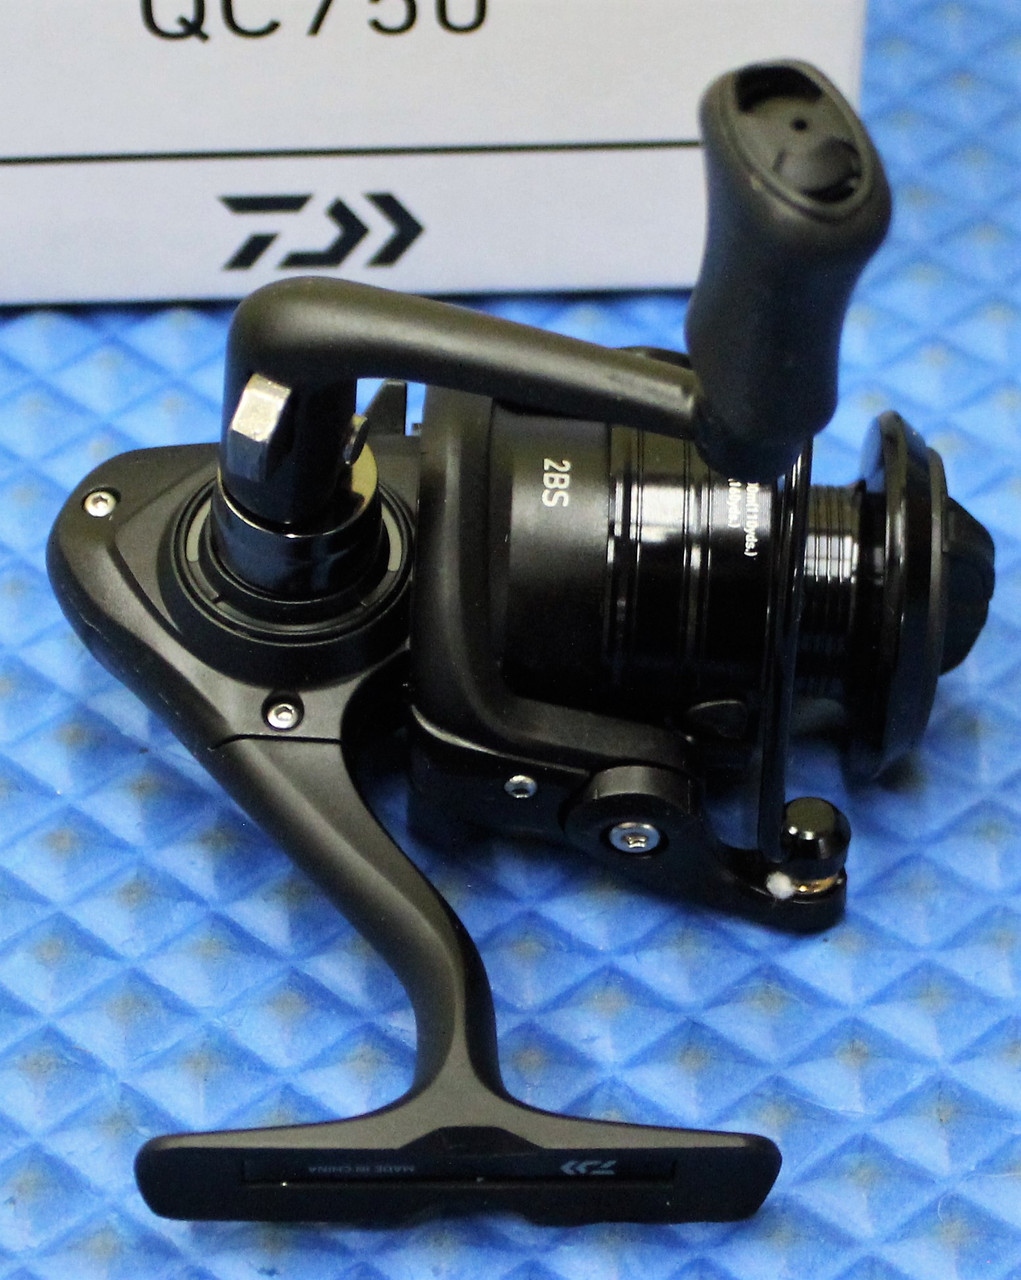 Daiwa GS-10X ultralight, clean and lube. This is a well-made reel! 